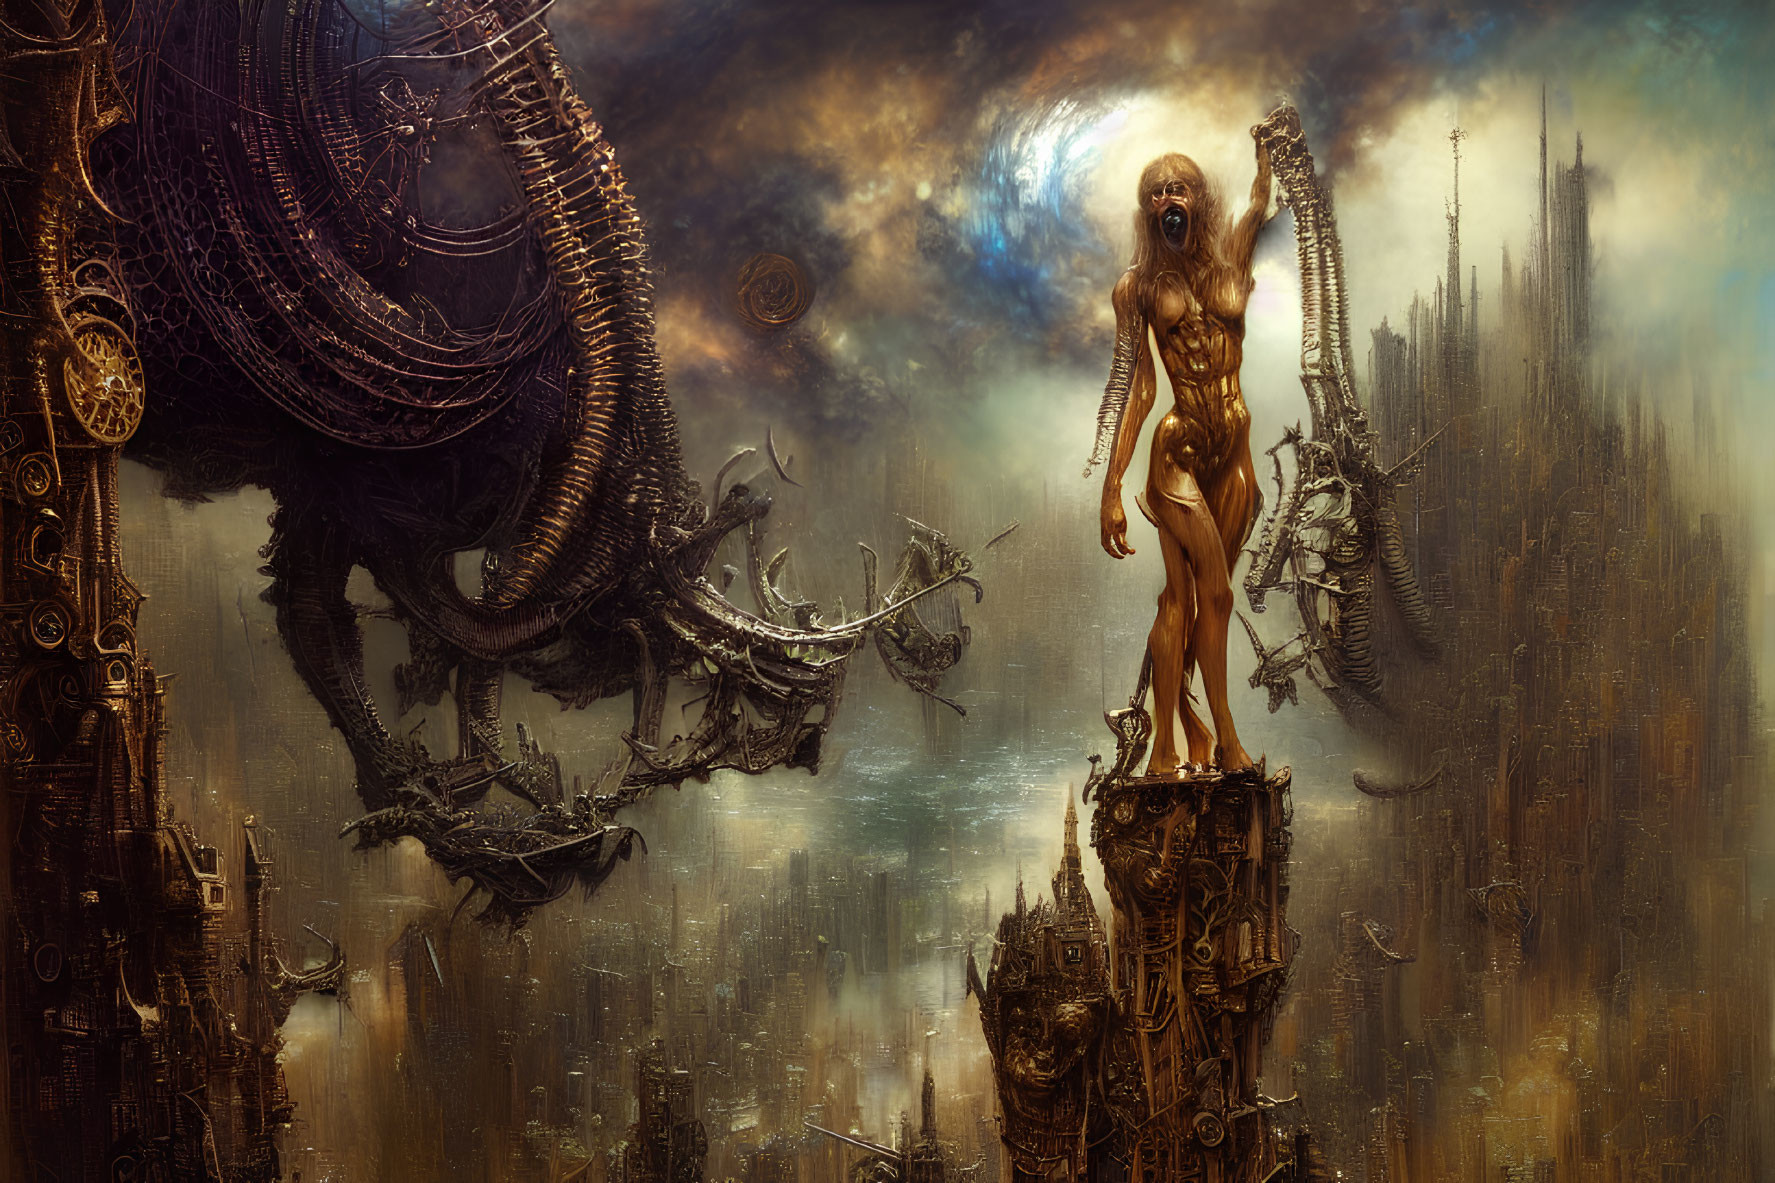 Surreal apocalyptic landscape with humanoid figure and cosmic ruins